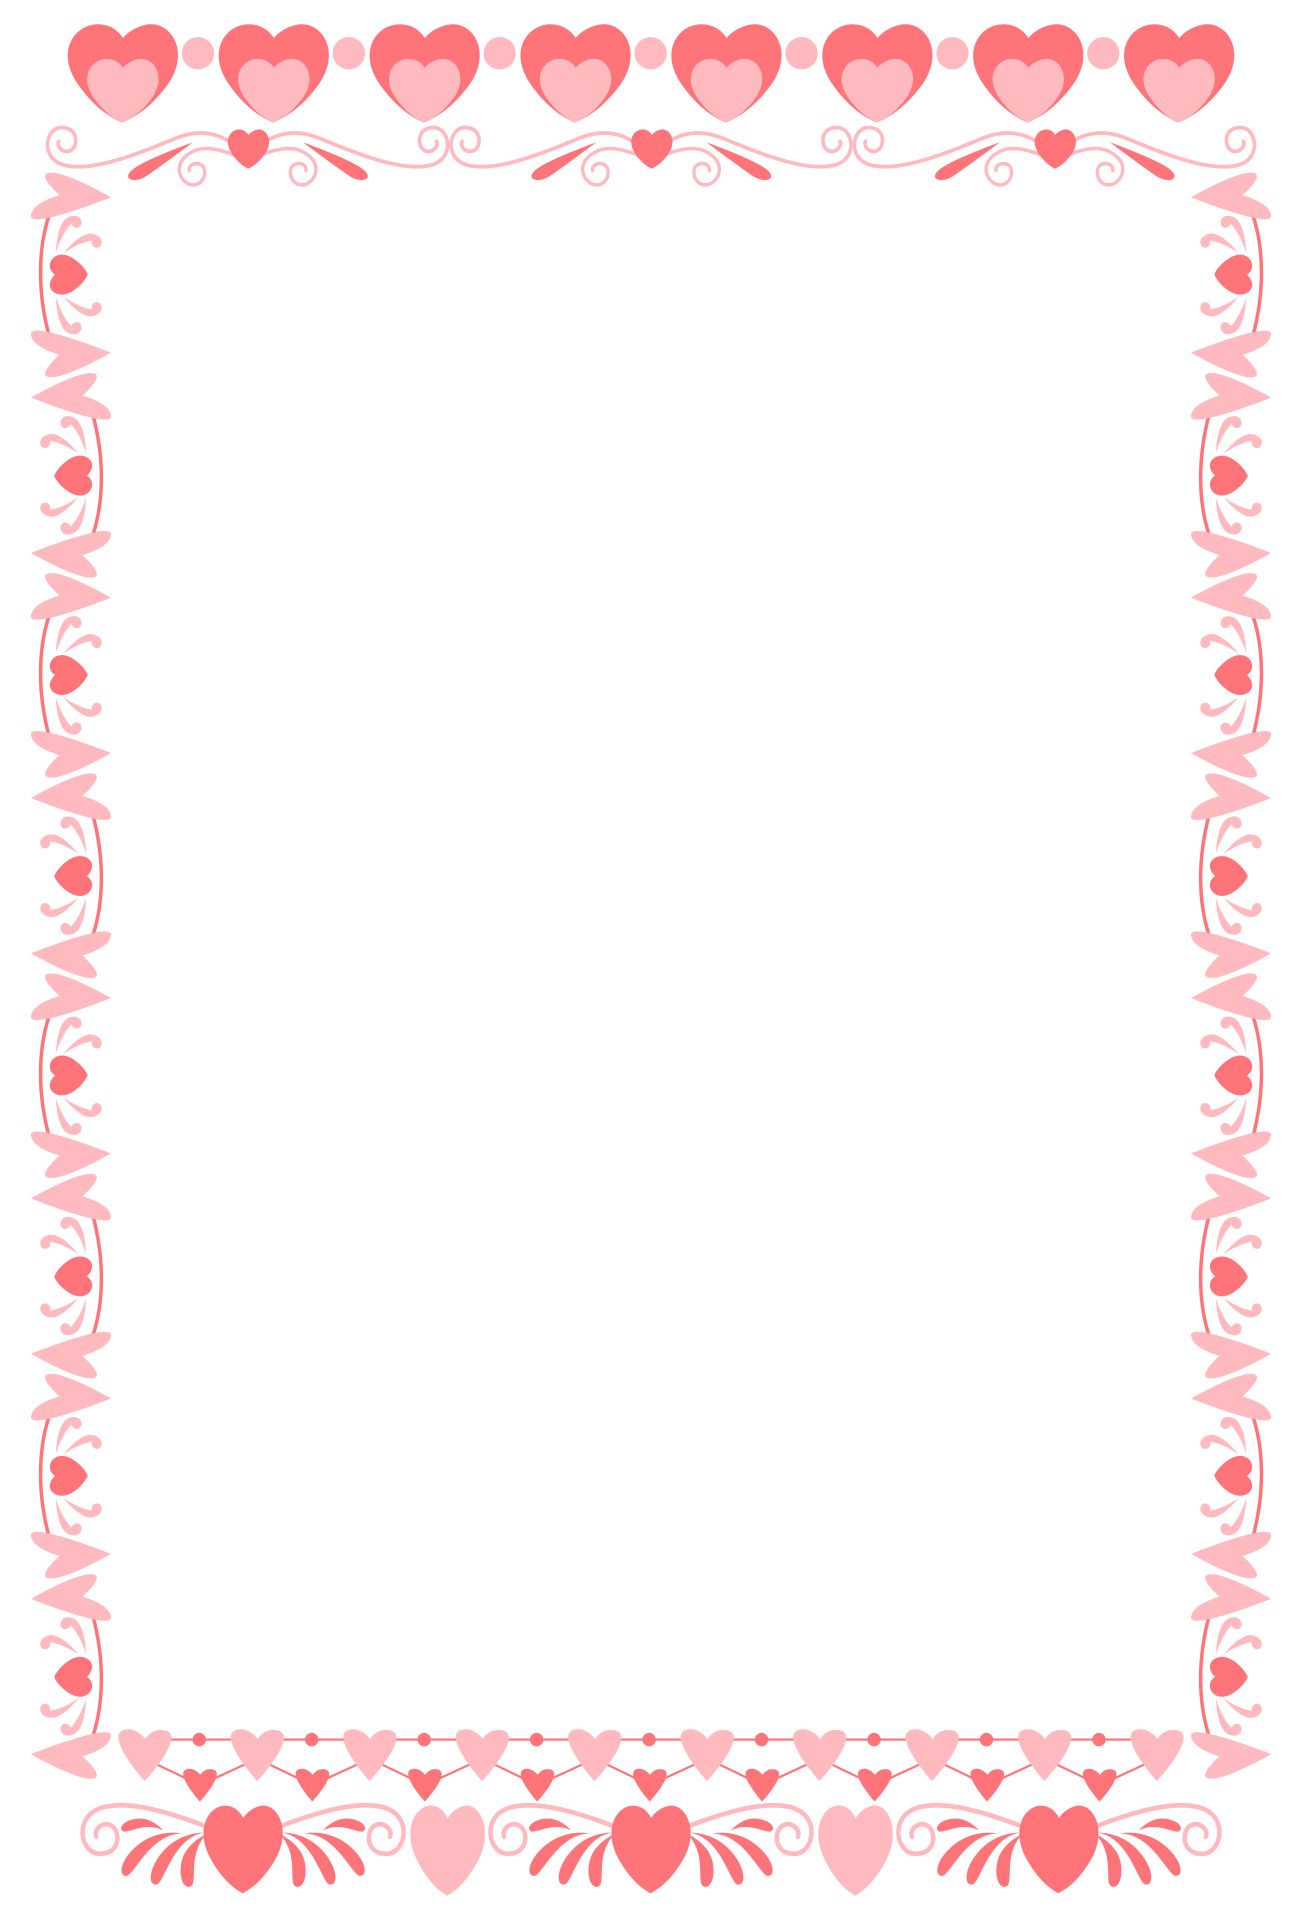 7 Best Images Of Free Printable Valentine Borders Valentine s Day